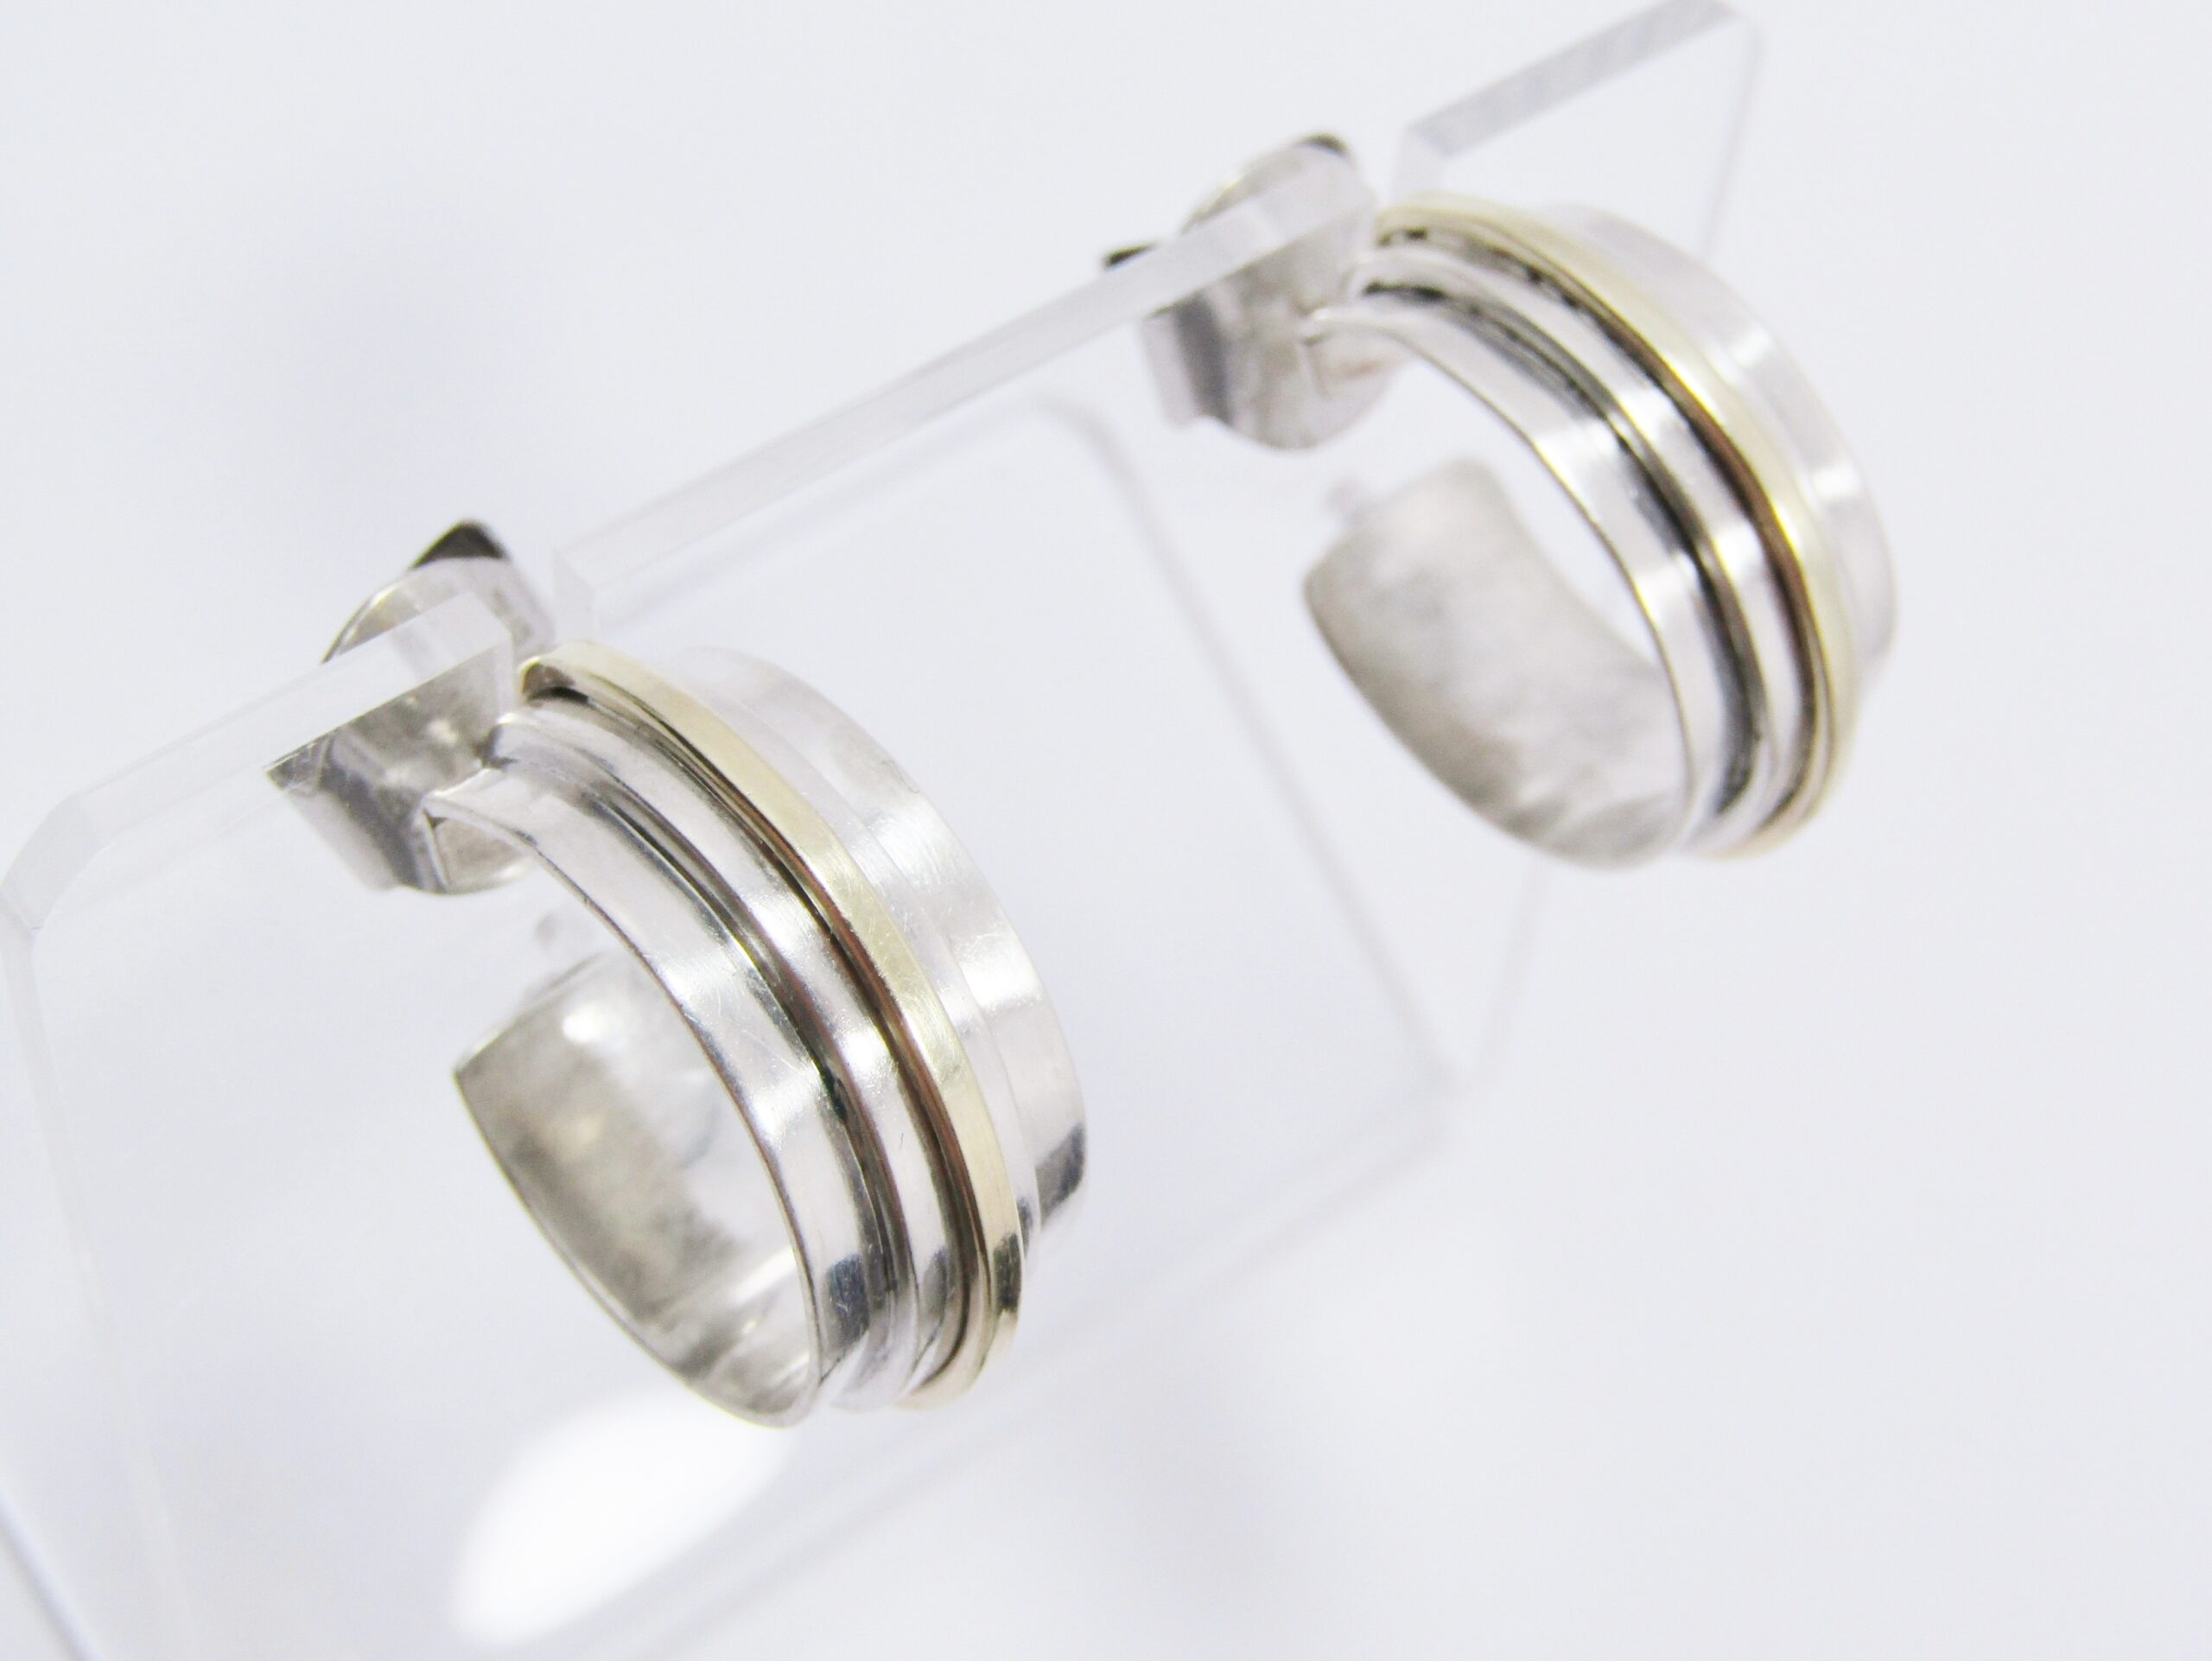 Gorgeous Pair of Medium Size Hoop Earrings in Sterling Silver and 18ct Gold